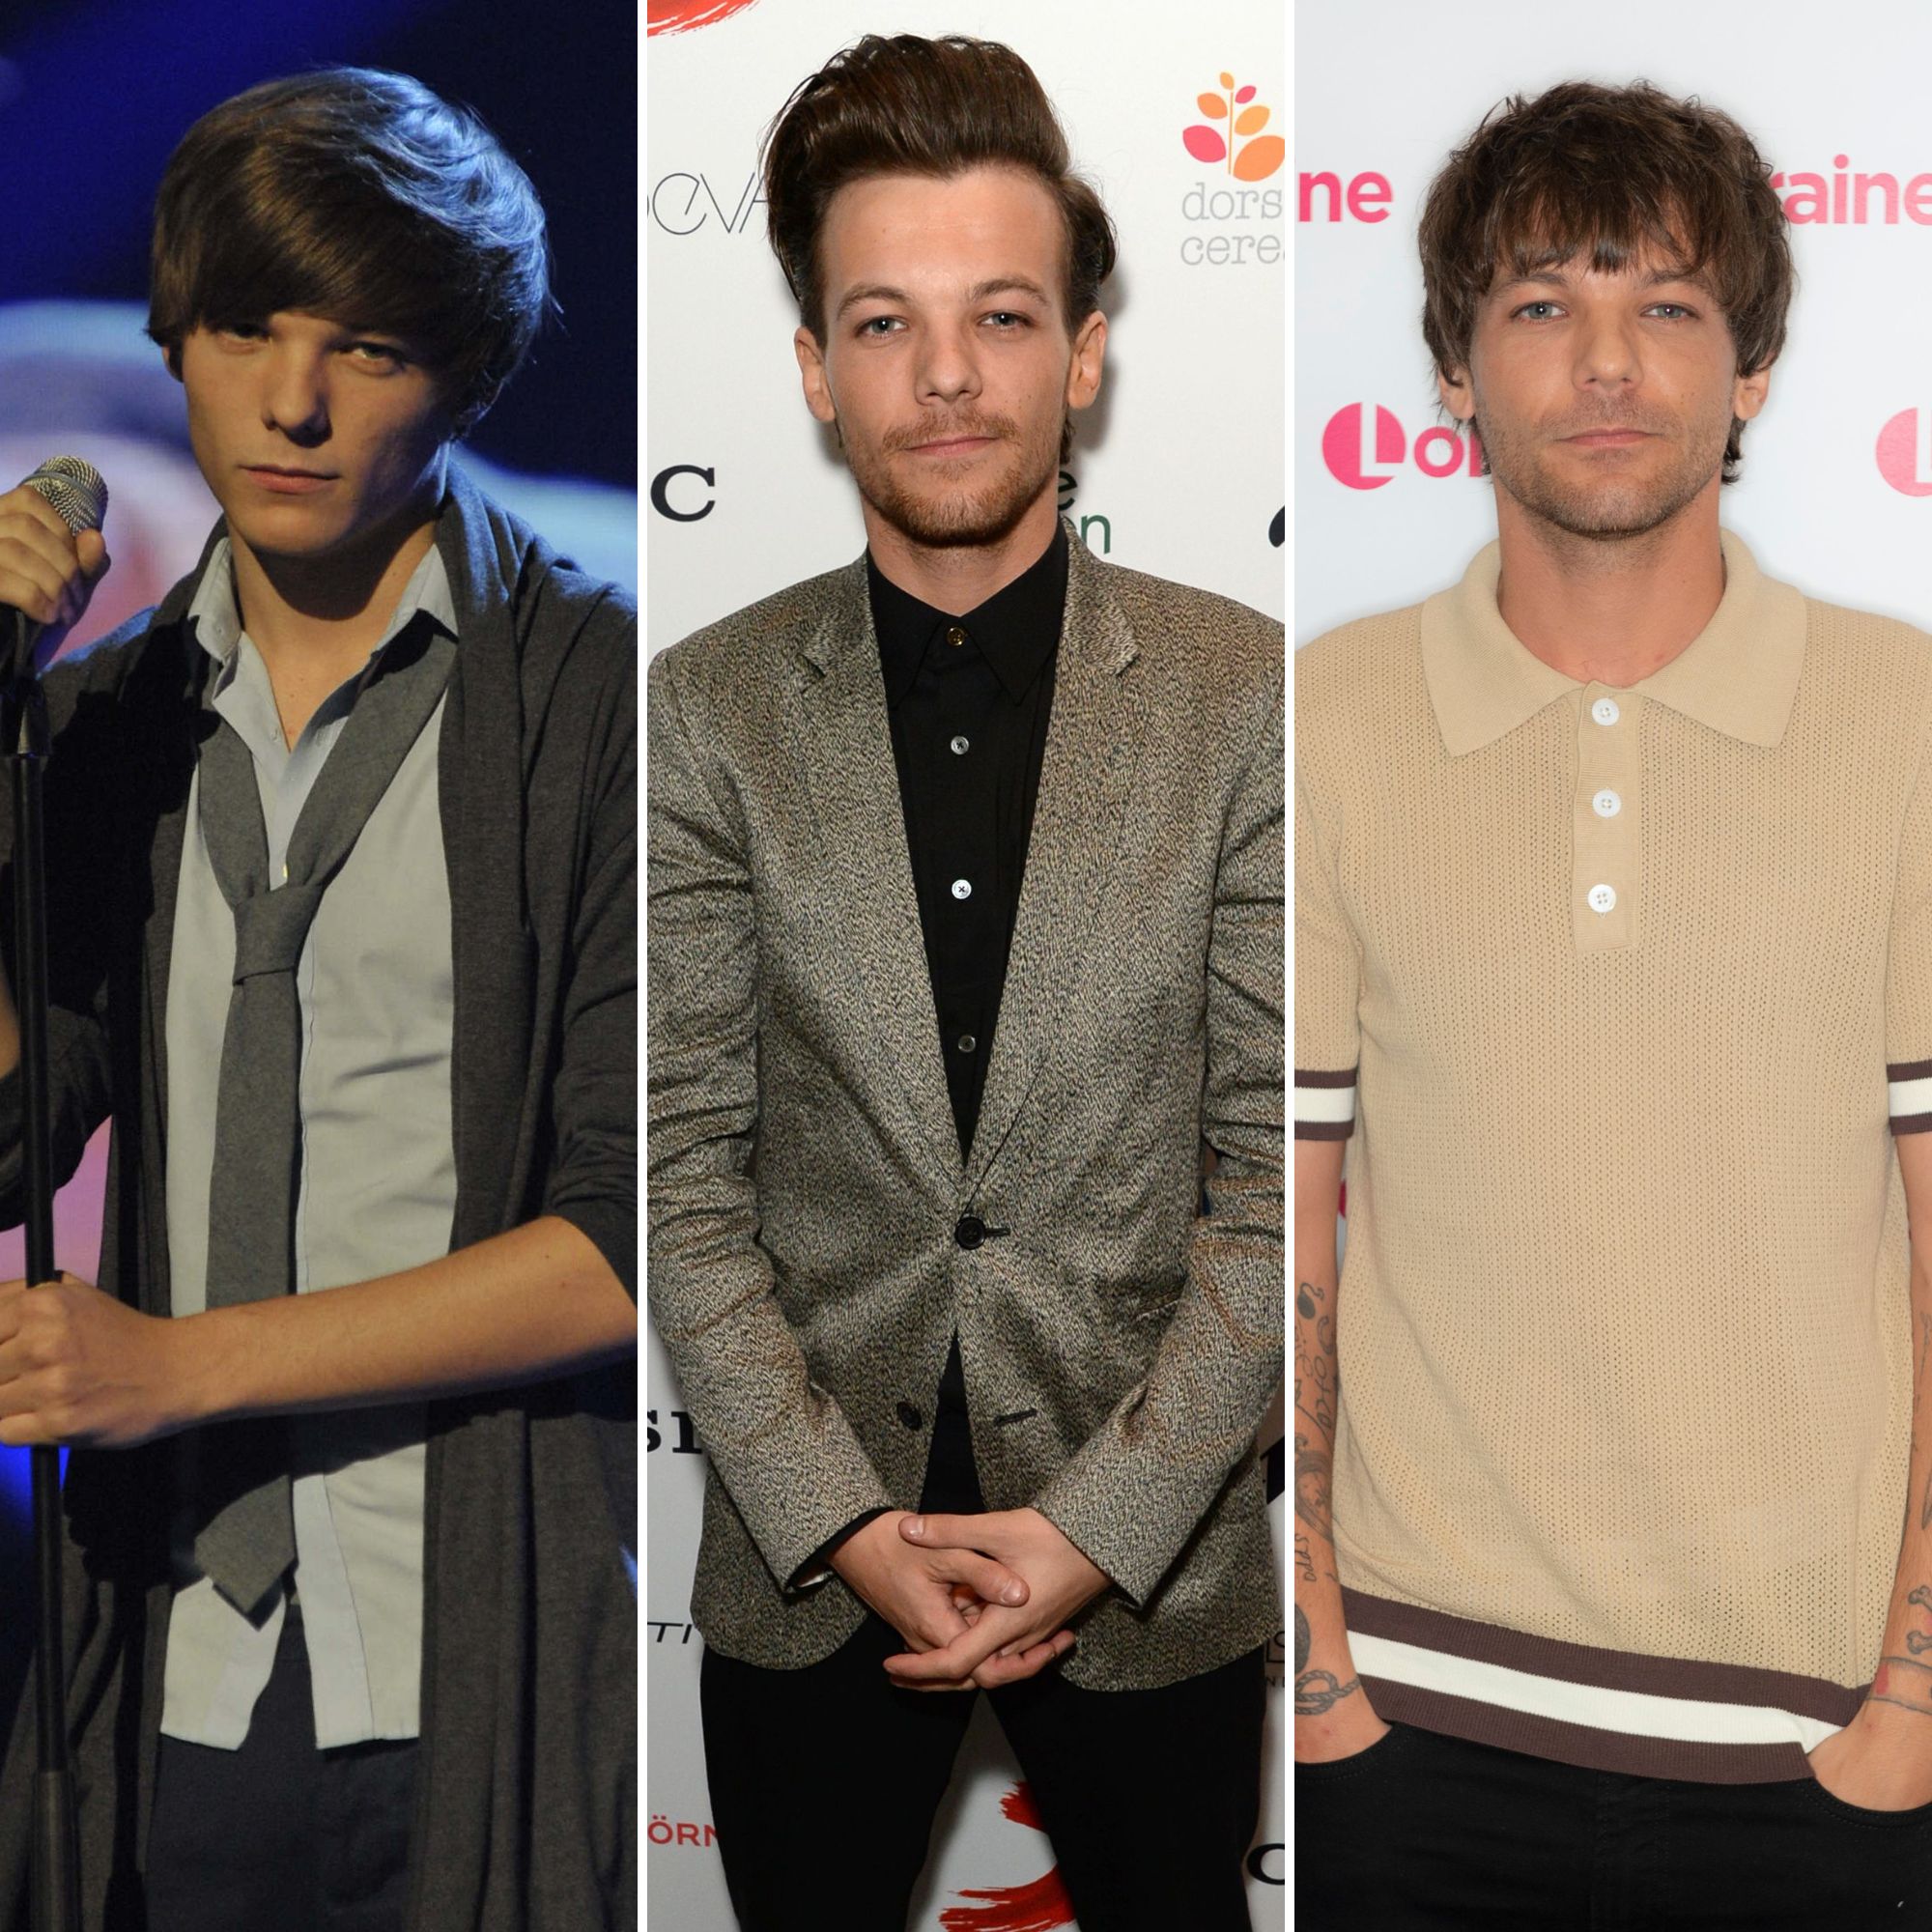 Louis Tomlinson on One Direction's Reunion and 'Today Show' Performance